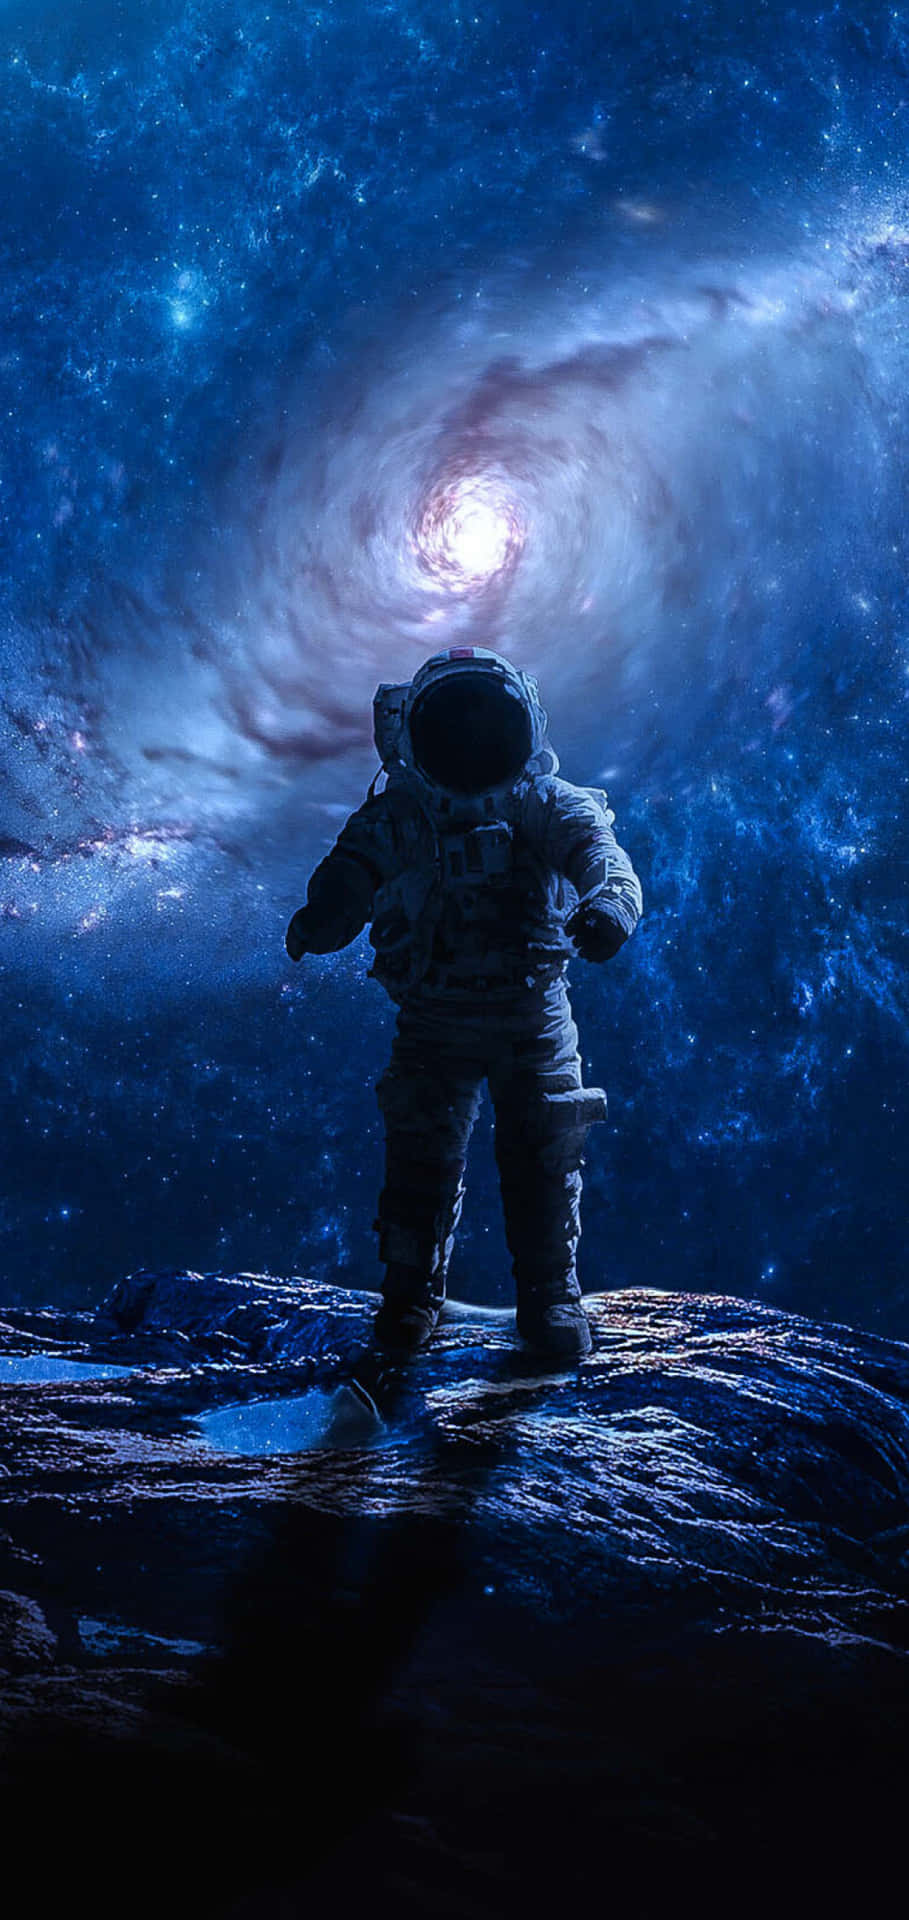 Iphone Xr Space Astronaut On Moon Wallpaper